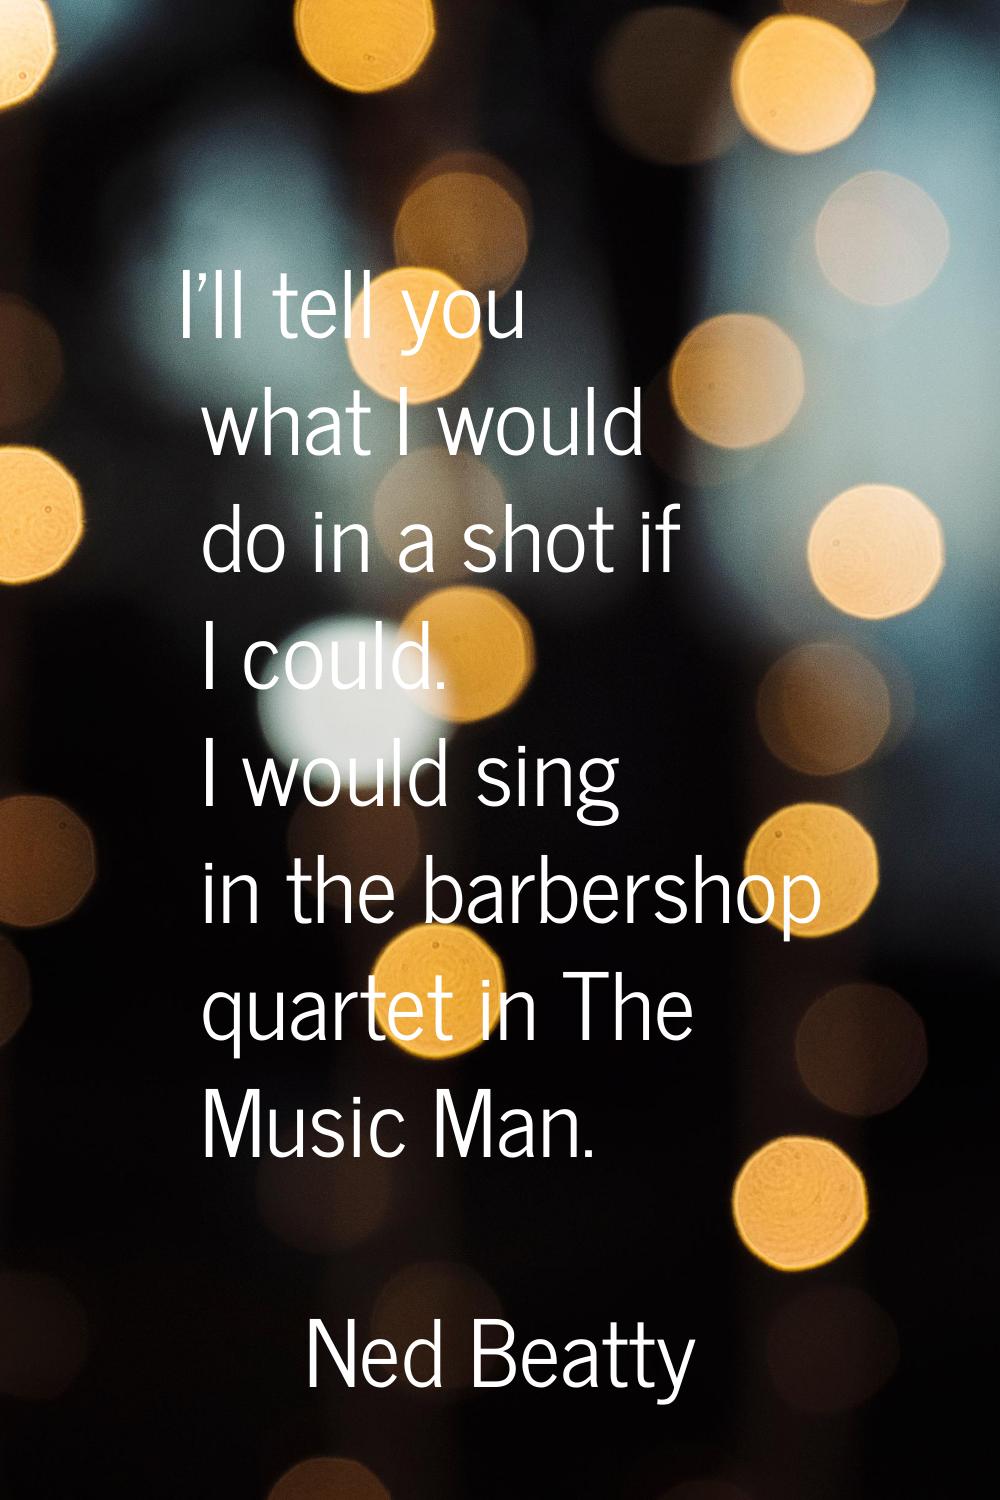 I'll tell you what I would do in a shot if I could. I would sing in the barbershop quartet in The M